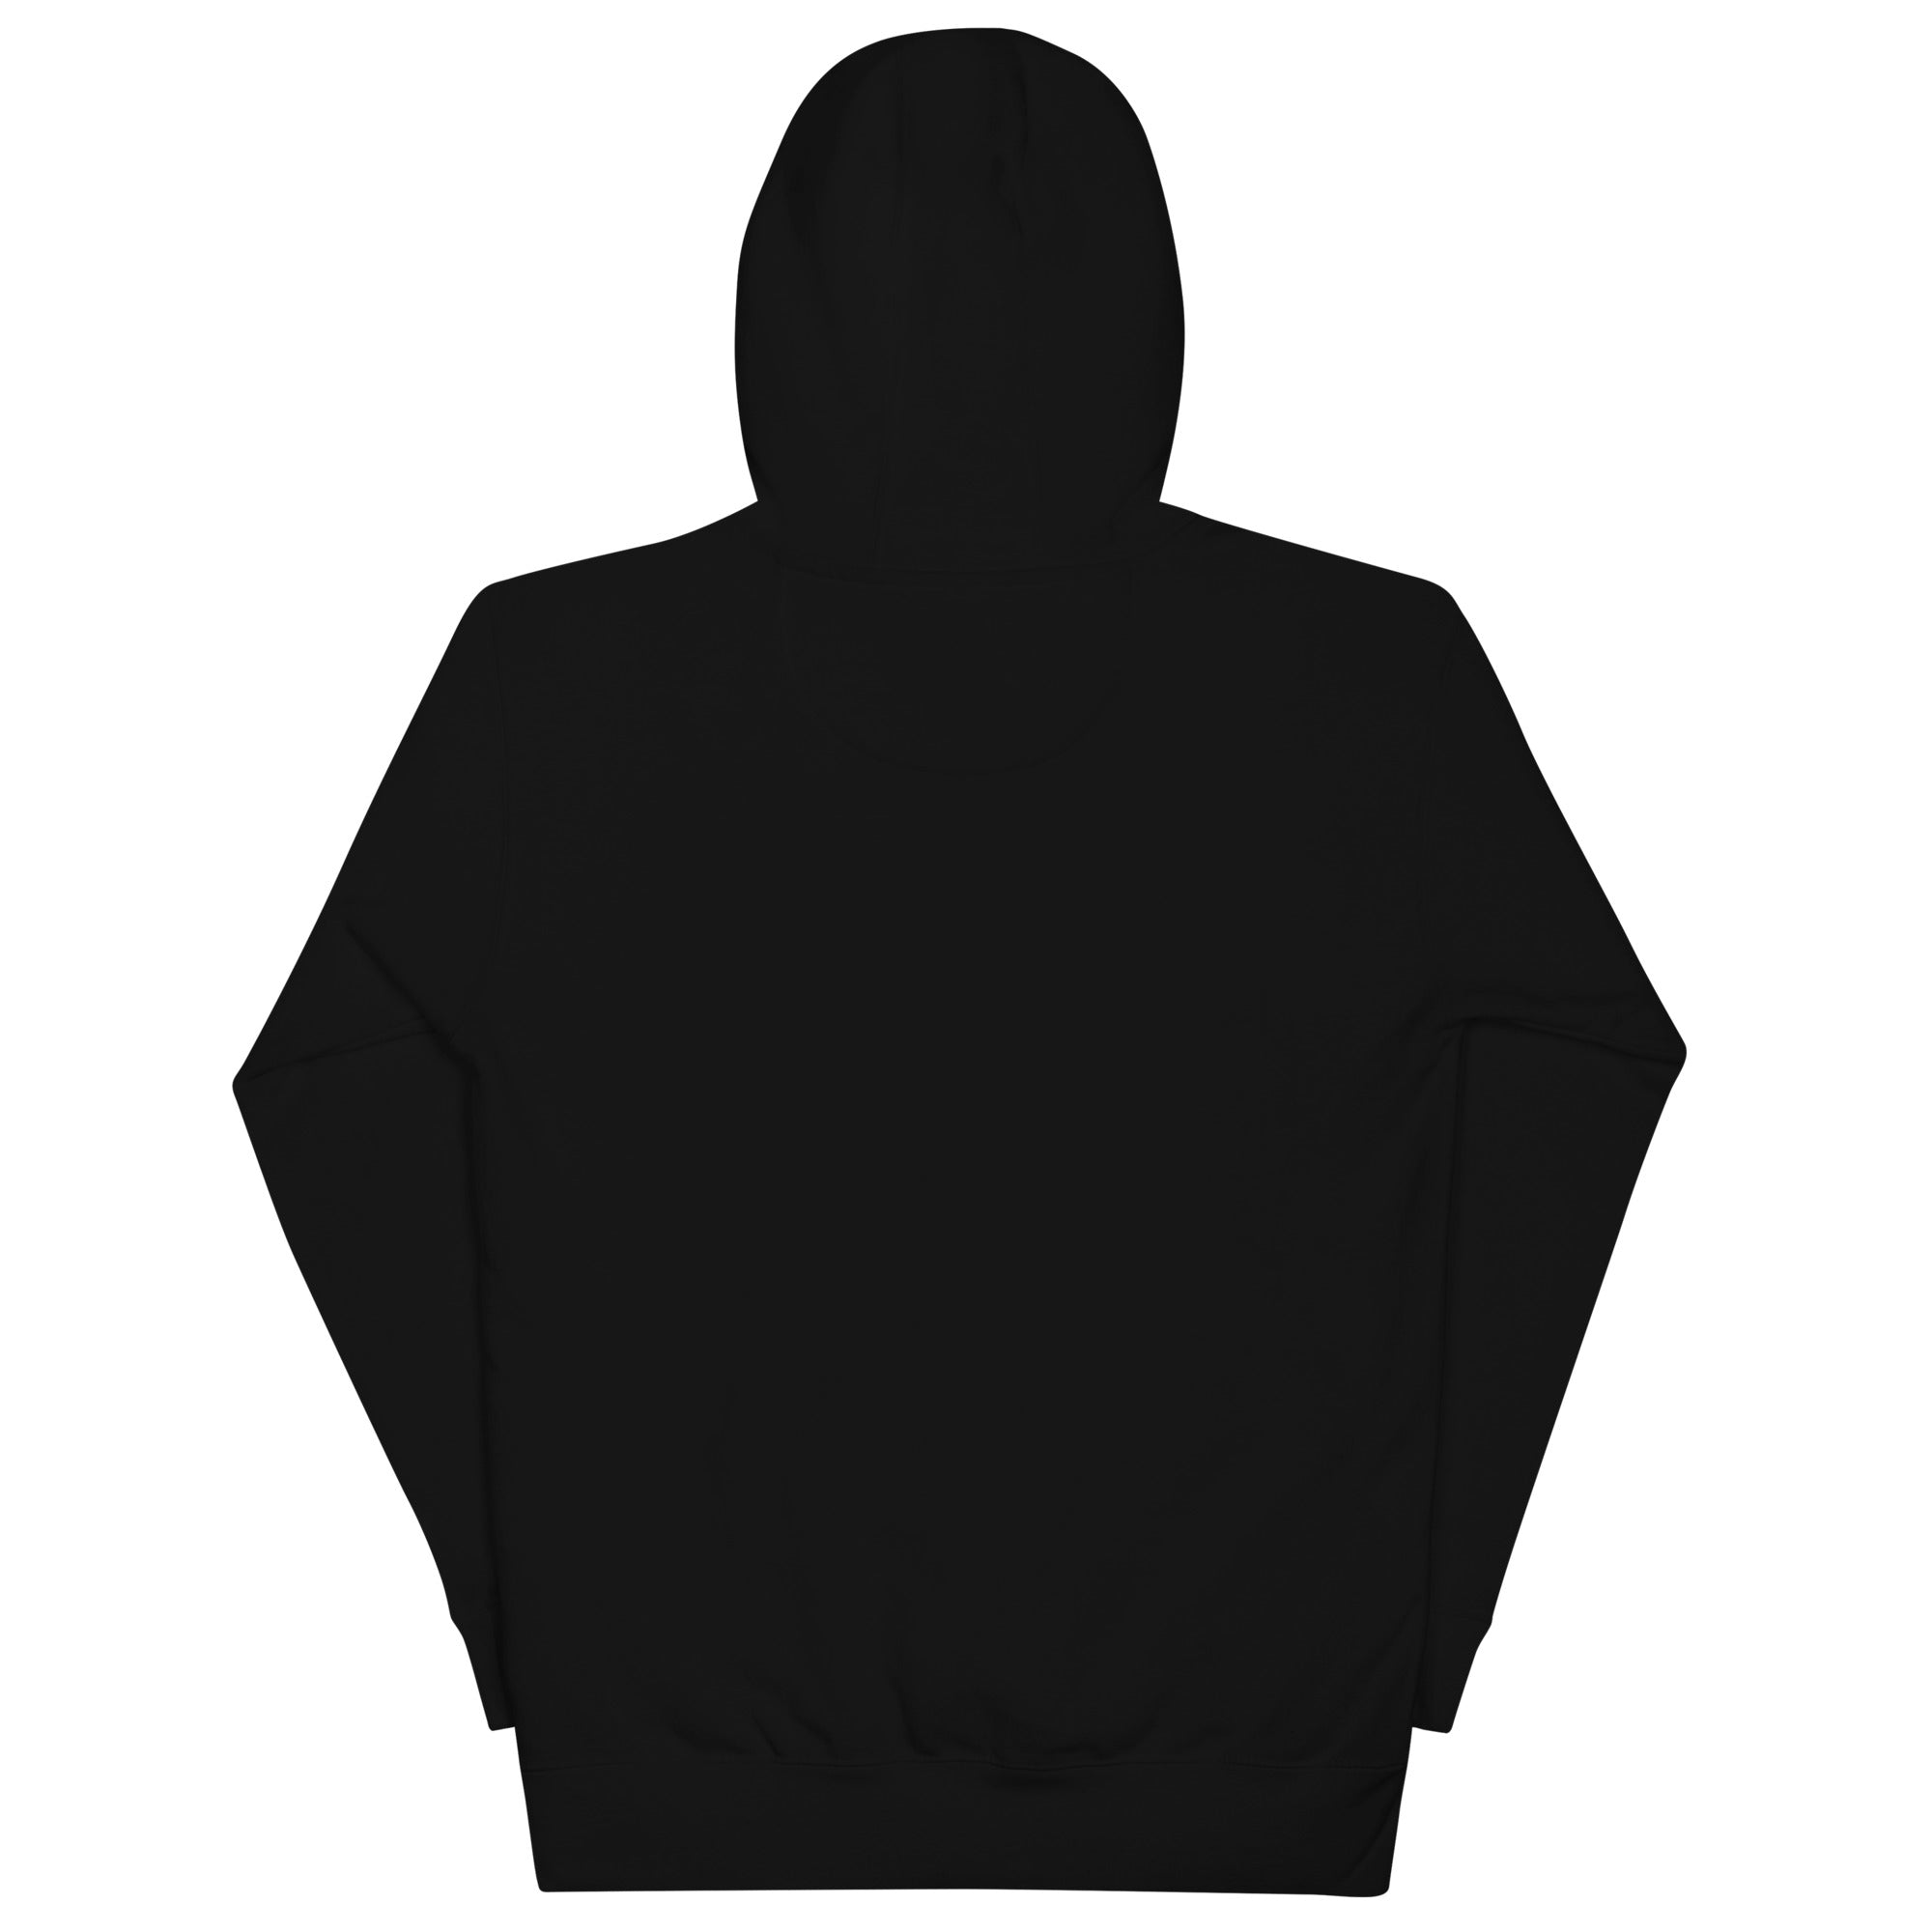 ***CHECK SIZING CHART*** Embroidered FireDrake Artistry™ Unisex Hoodie